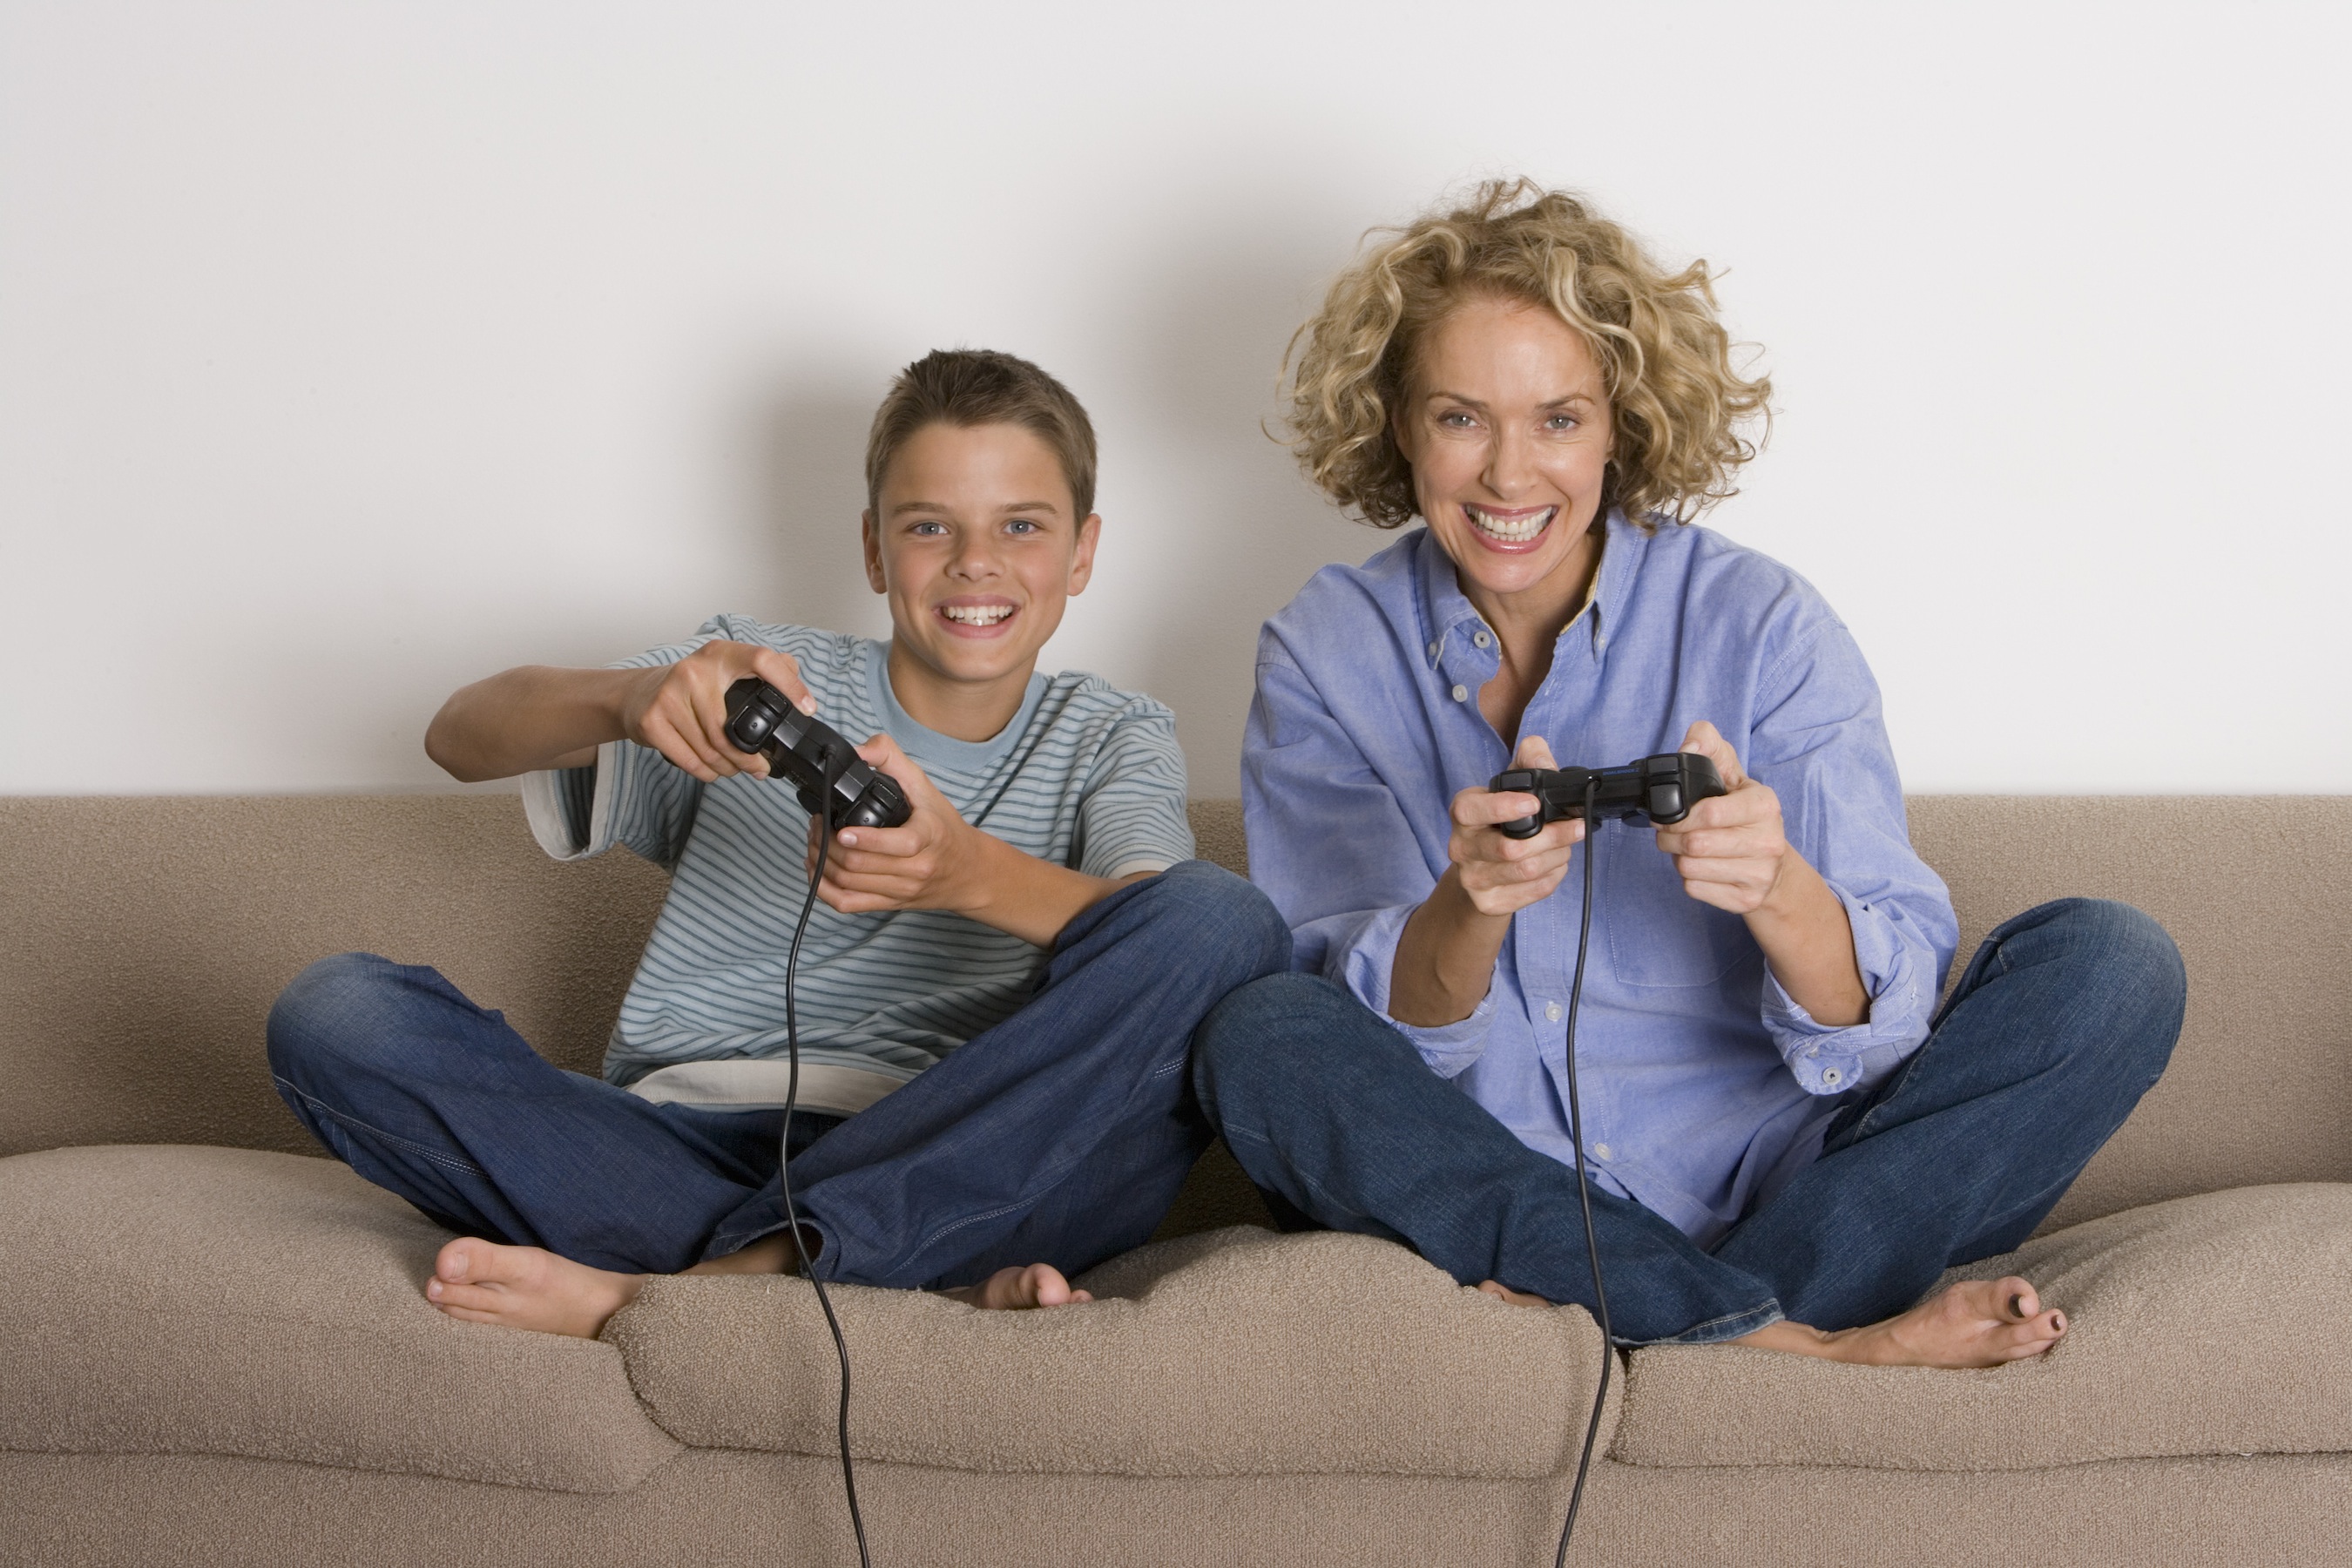 Video games help you stay young at heart